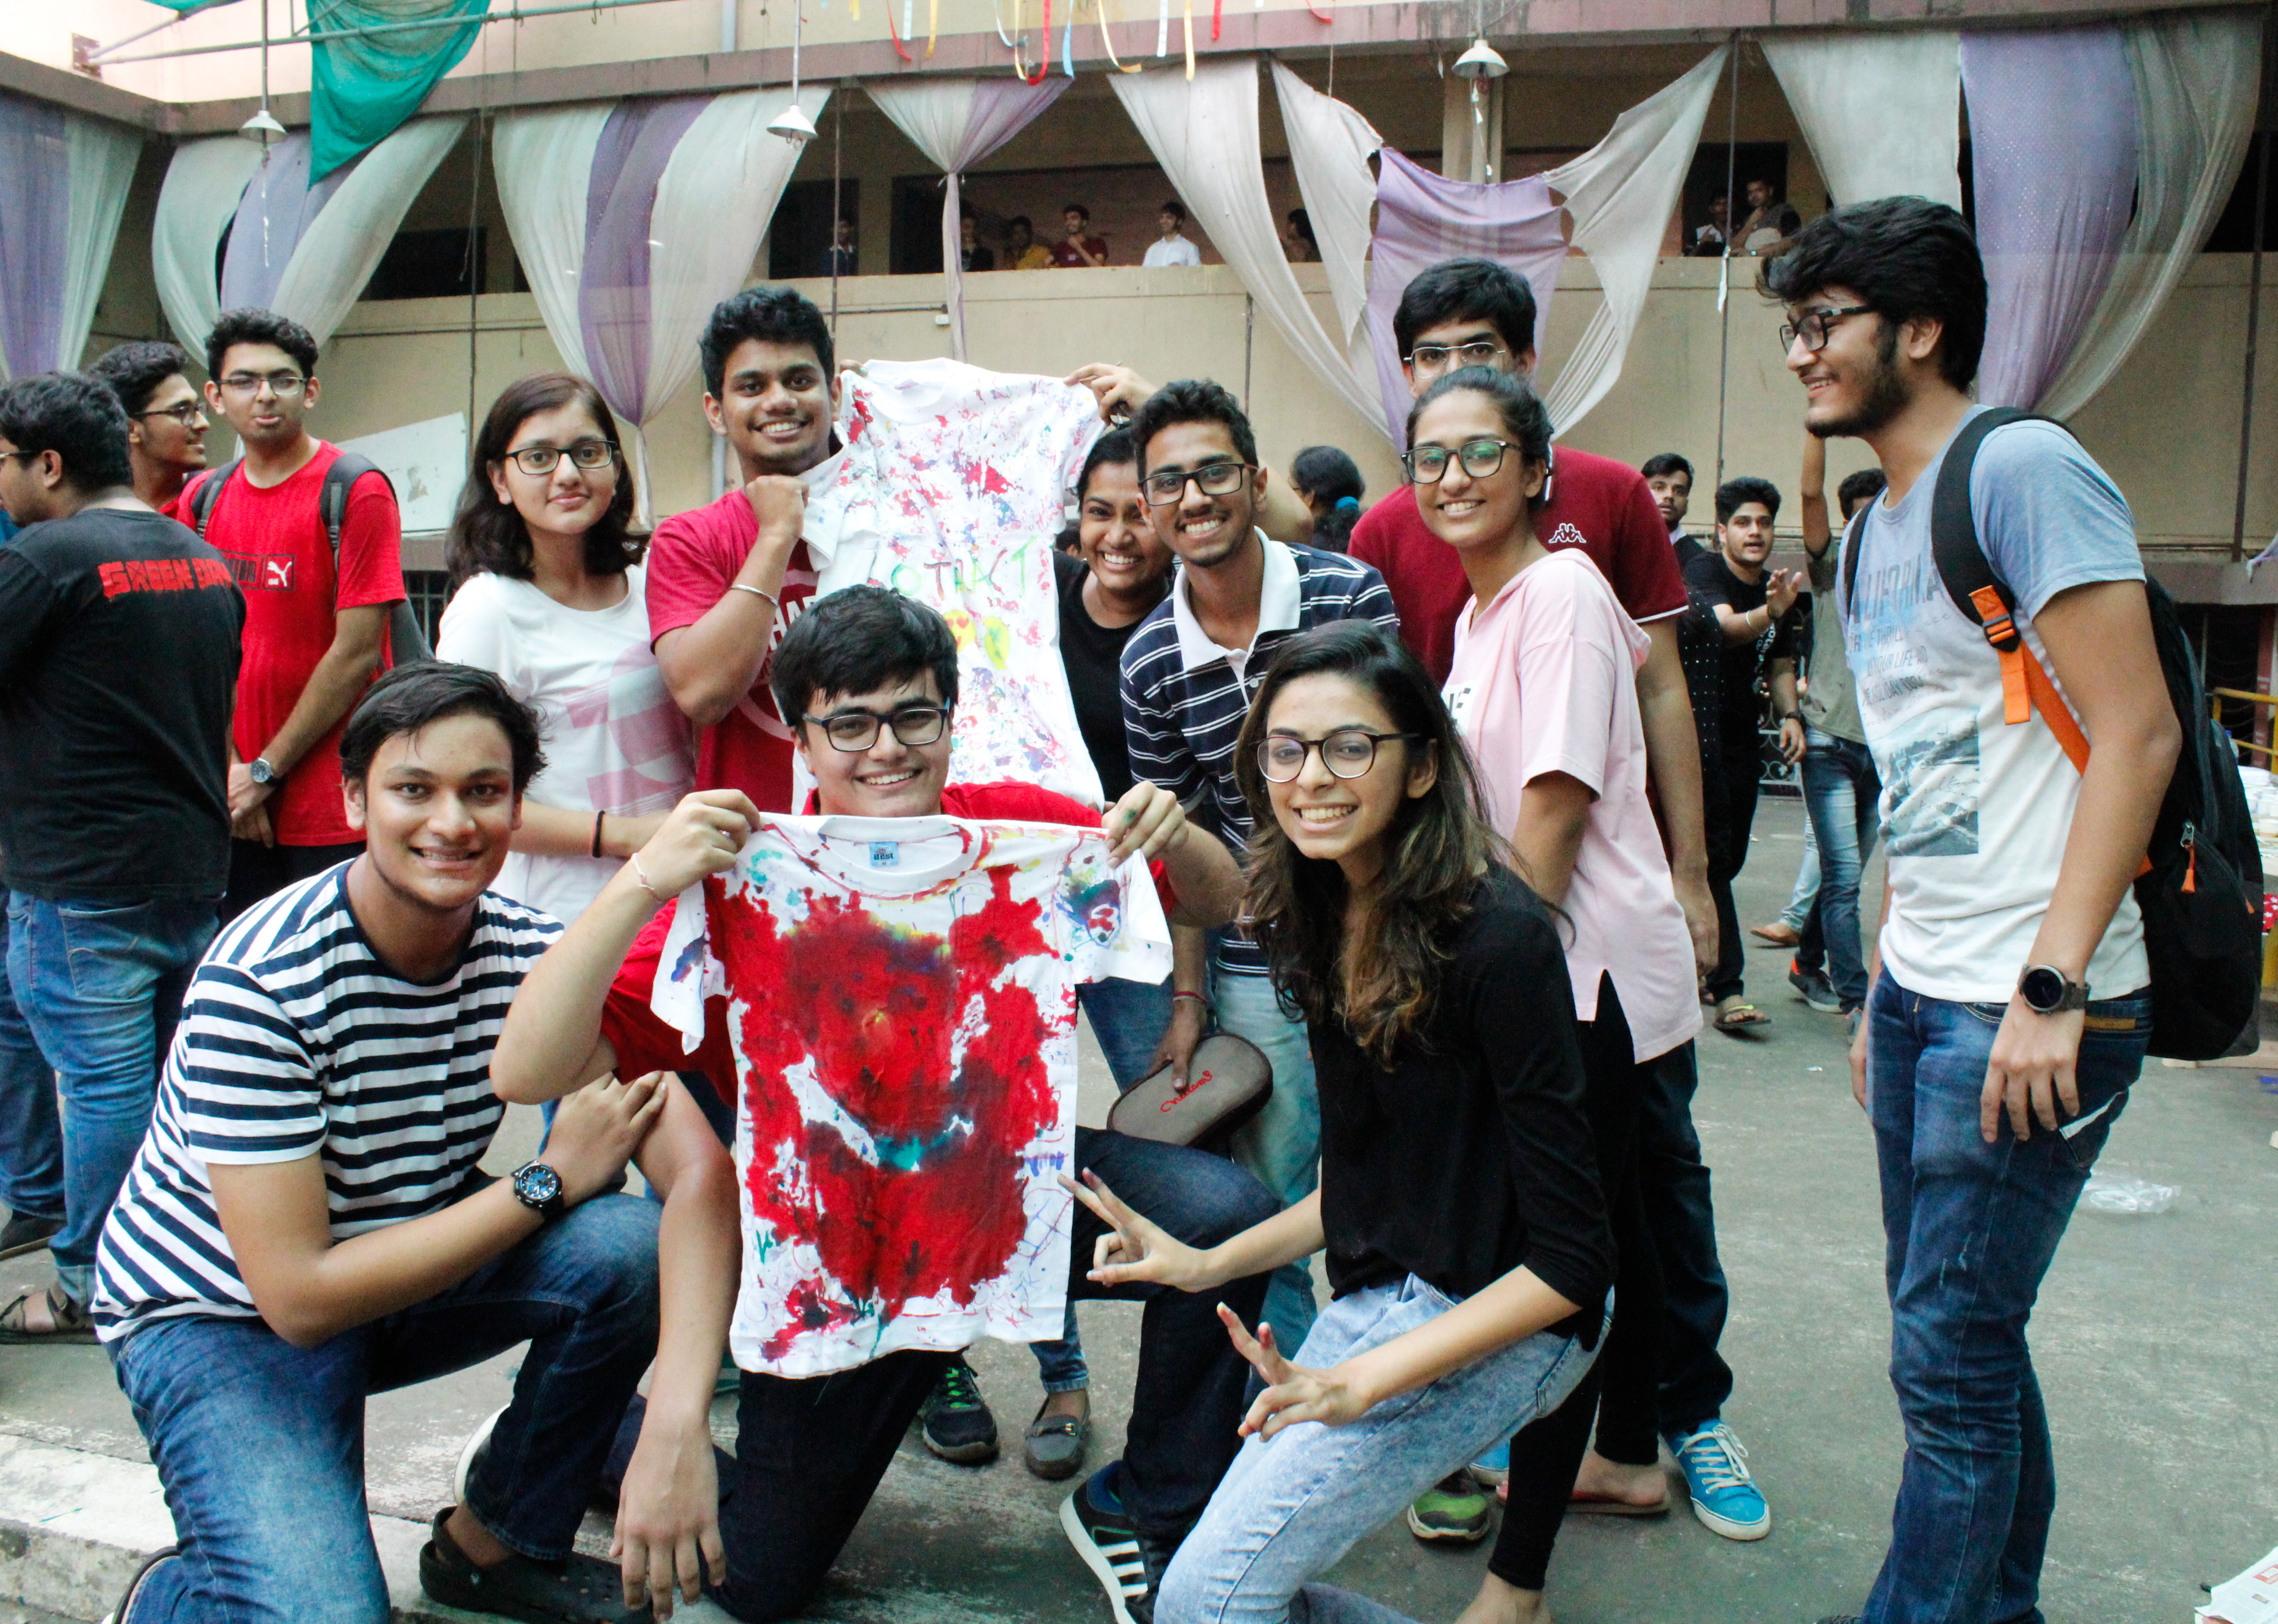 Rotaract's T shirt painting was a hit